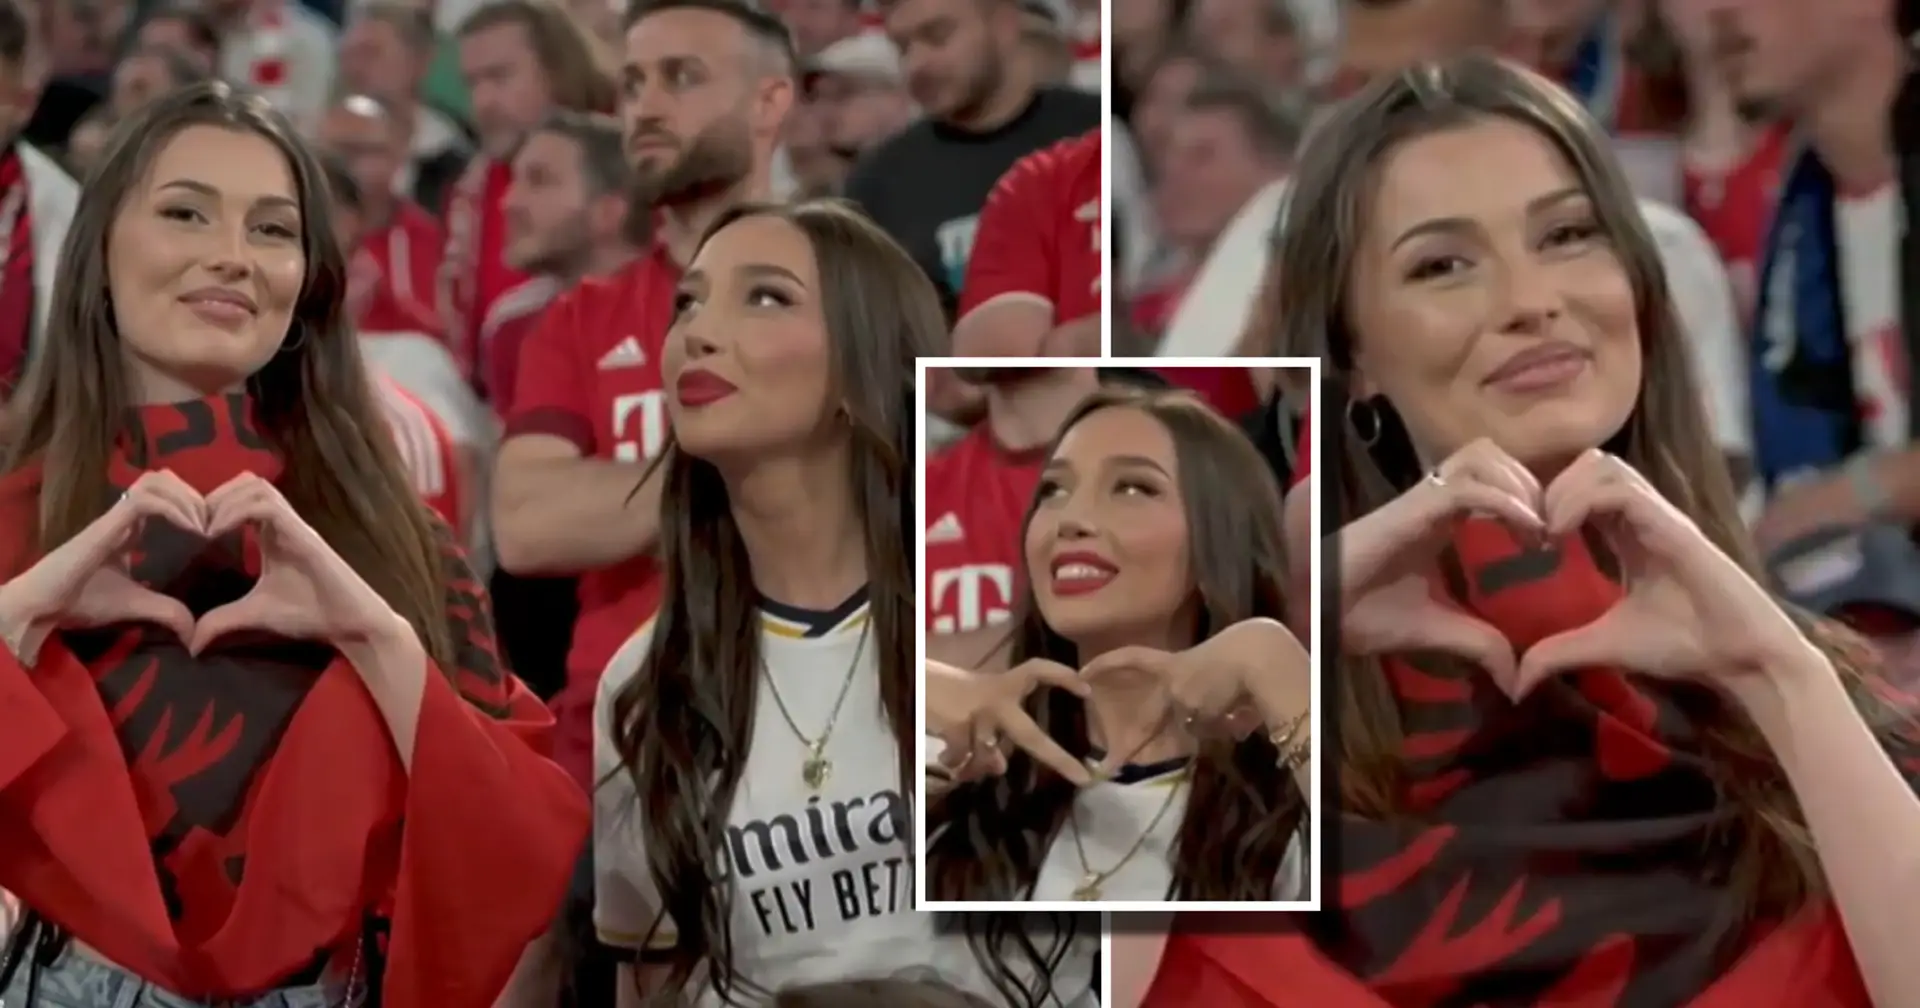 'Googling flights to Albania': Cameraman films two 'most beautiful girls in the stadium' in Bayern v Real Madrid — twice